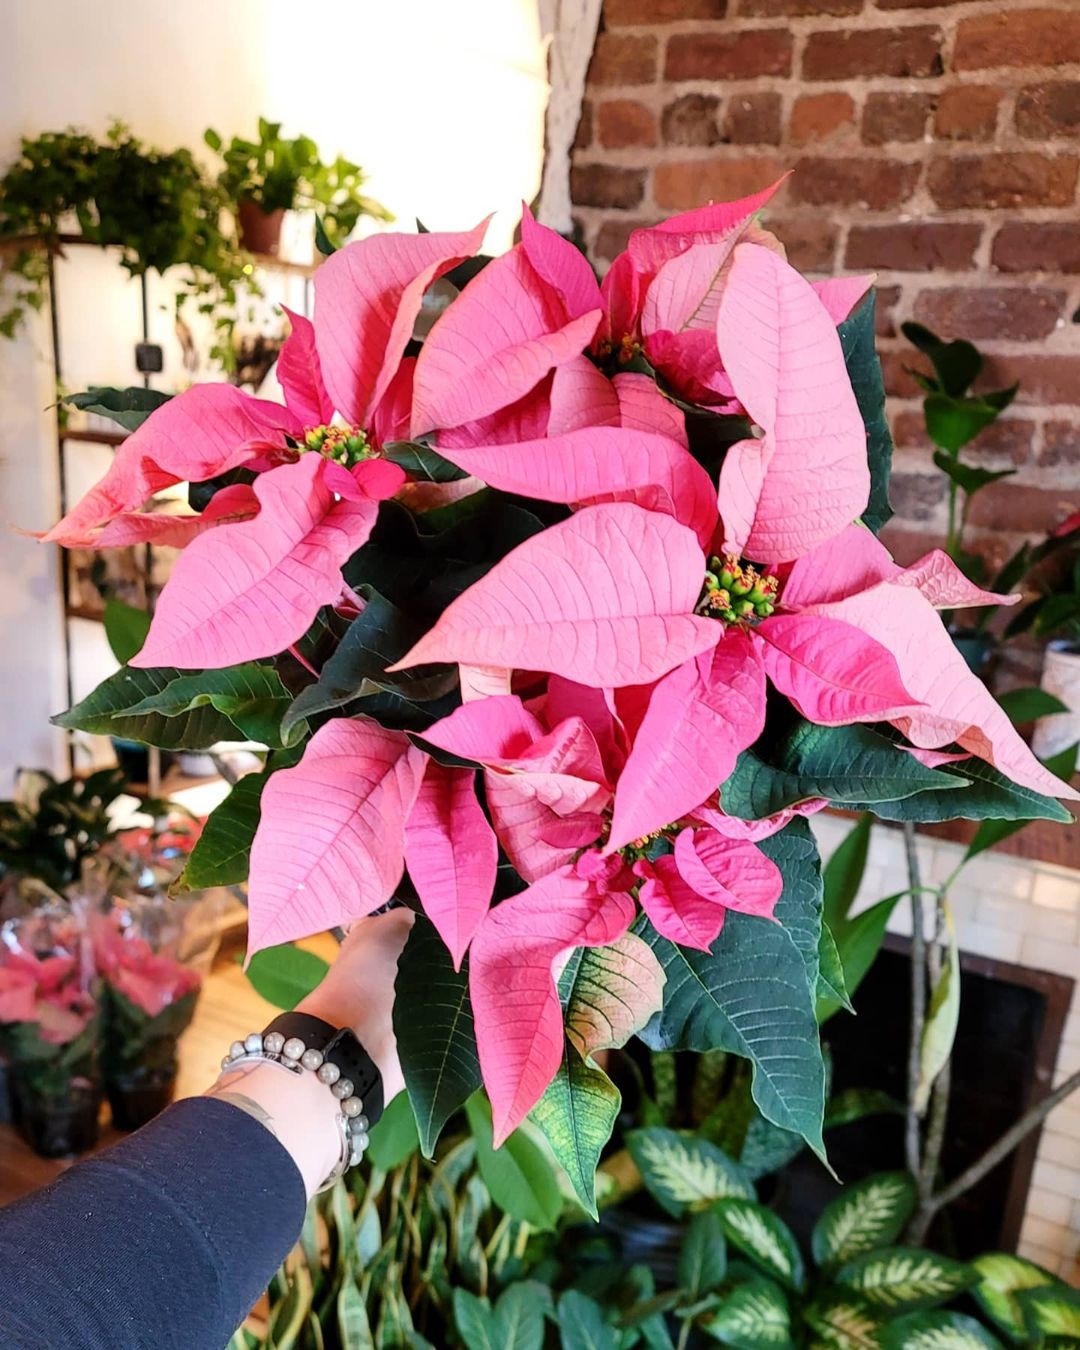 Holding a Pink Poinsettia in hand on Thursd